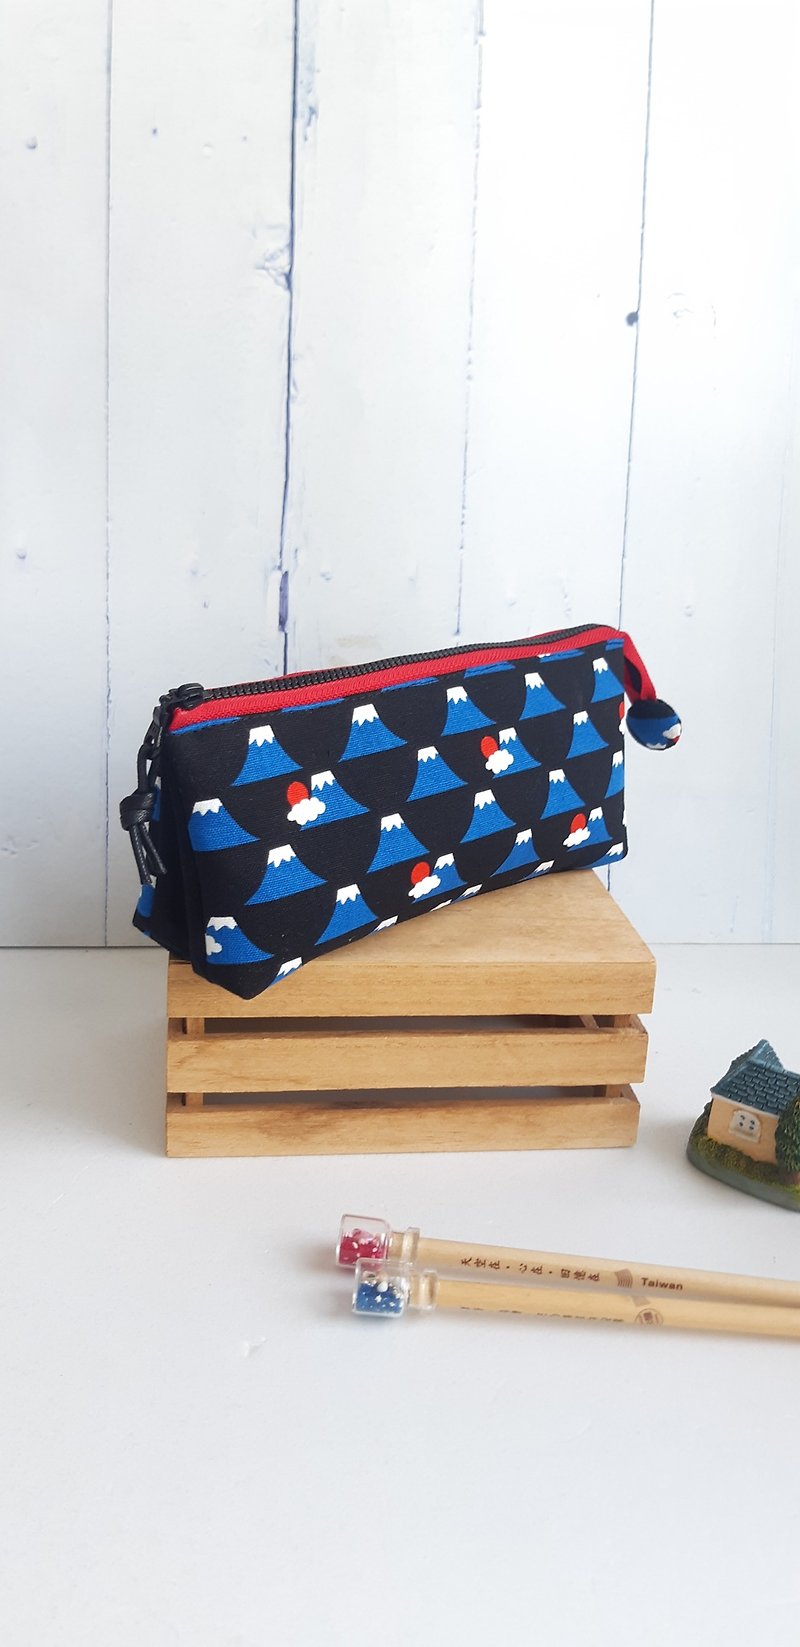 Mt. Fuji three-layer pencil case with 2 colors birthday exchange Christmas gift - Pencil Cases - Cotton & Hemp 